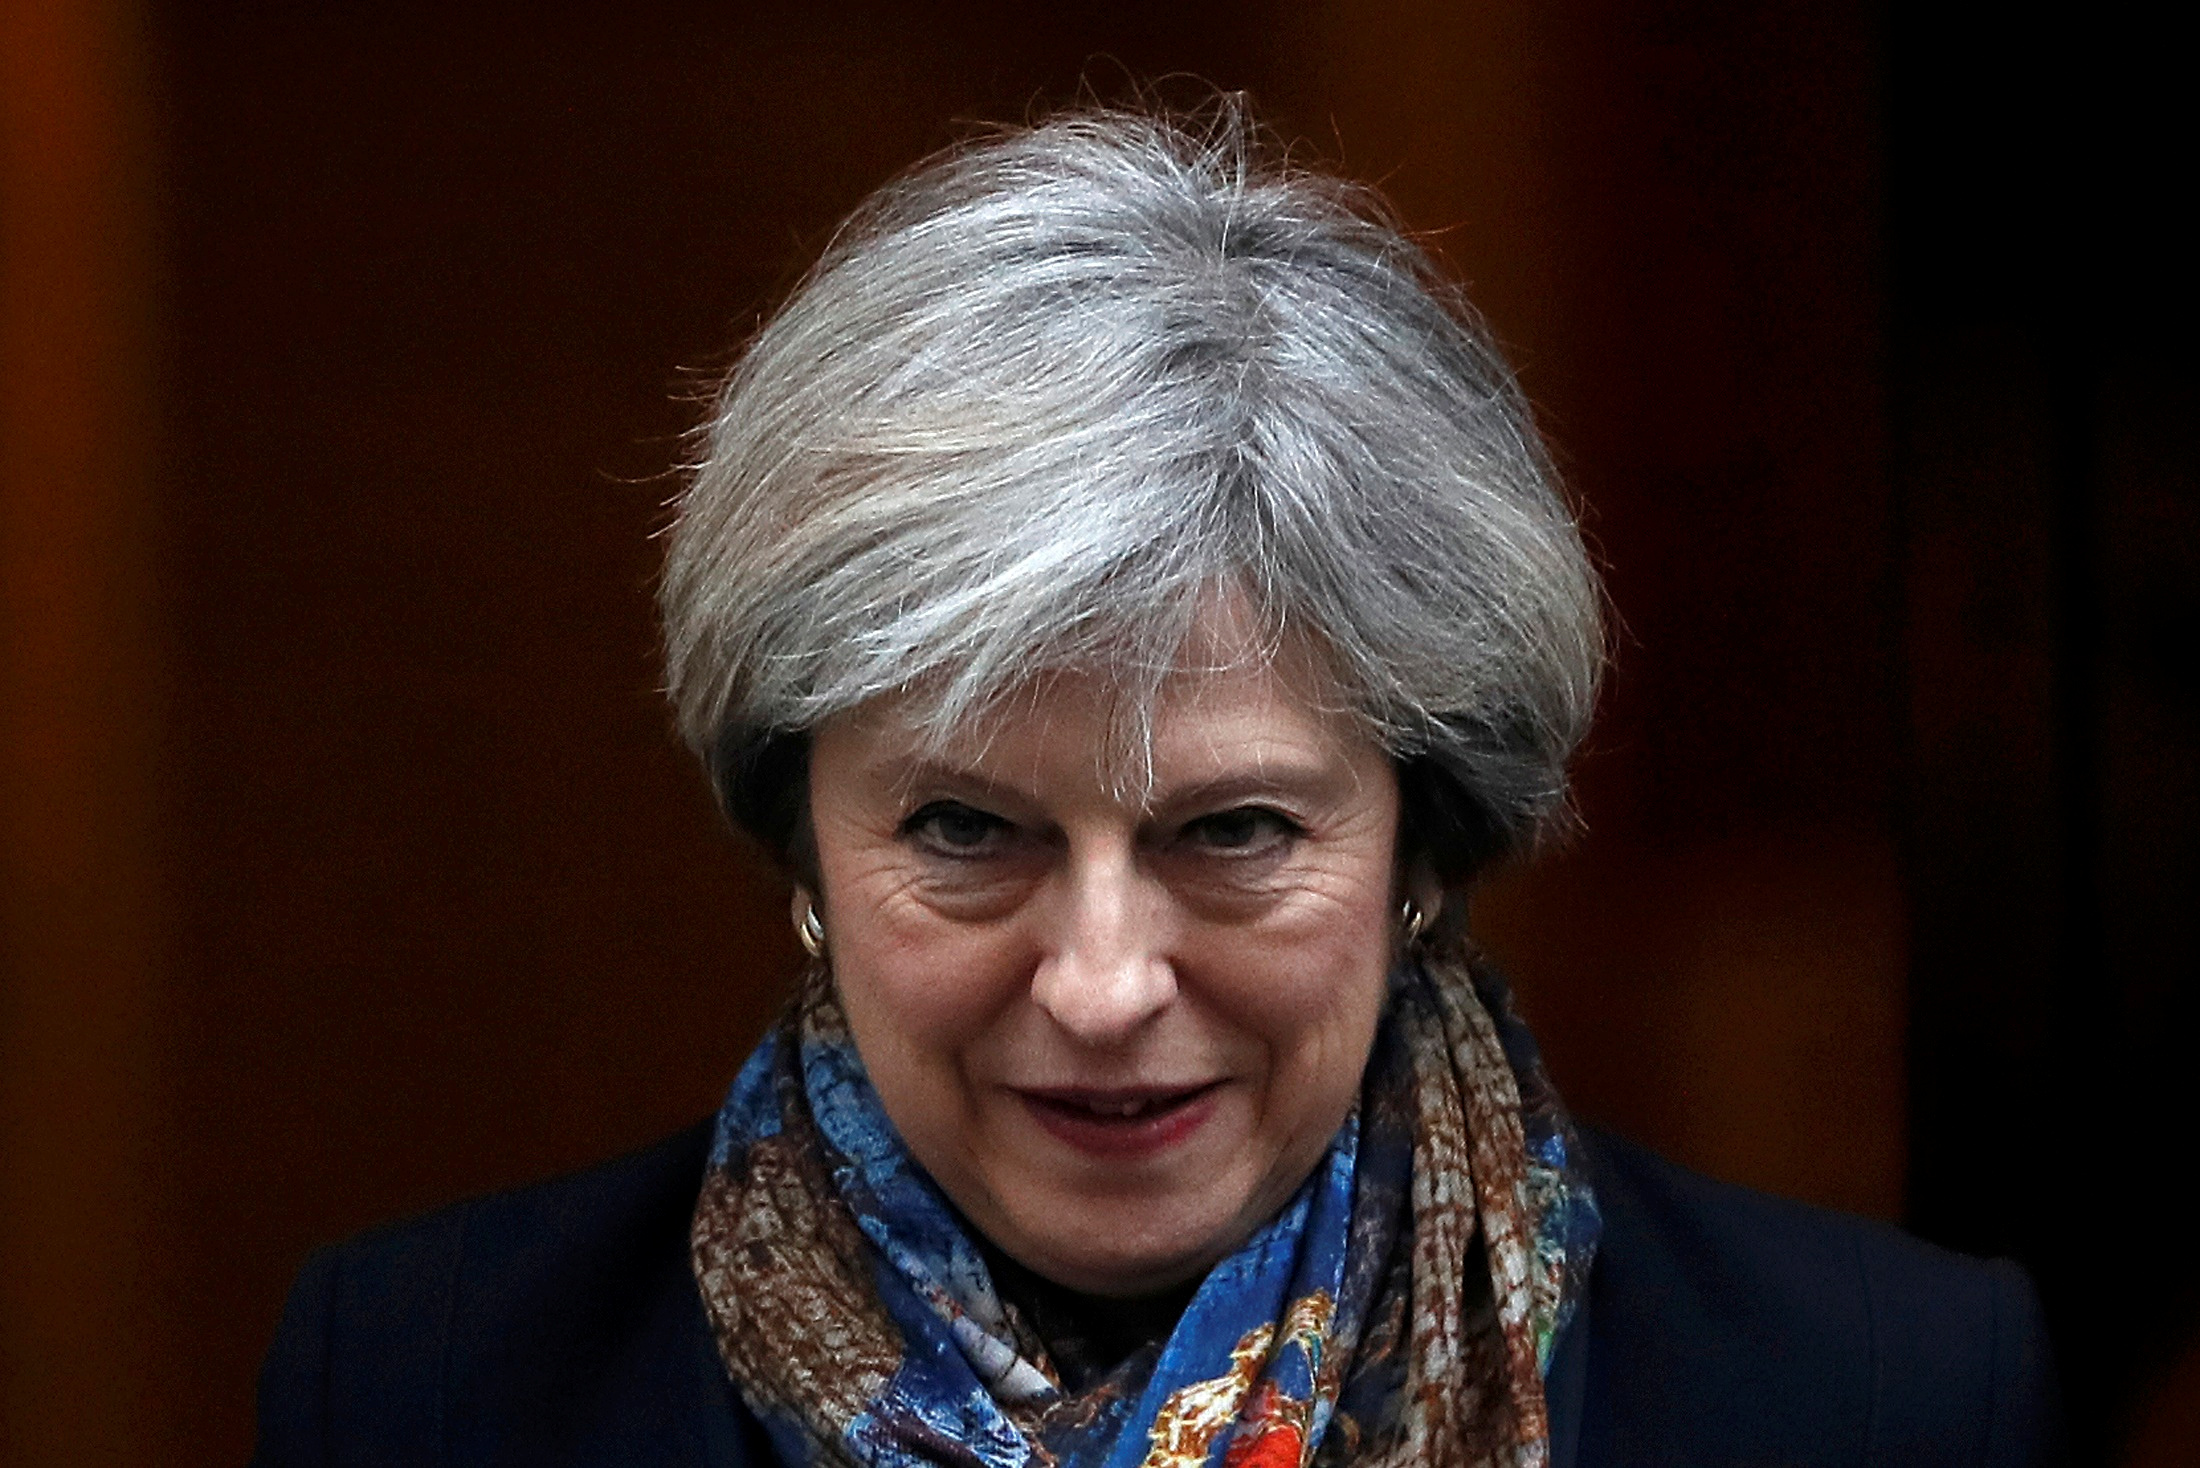 Britain's Prime Minister Theresa May leaves Number 10 Downing Street in London, Britain January 24, 2017. REUTERS/Stefan Wermuth TPX IMAGES OF THE DAY - RTSX4R2